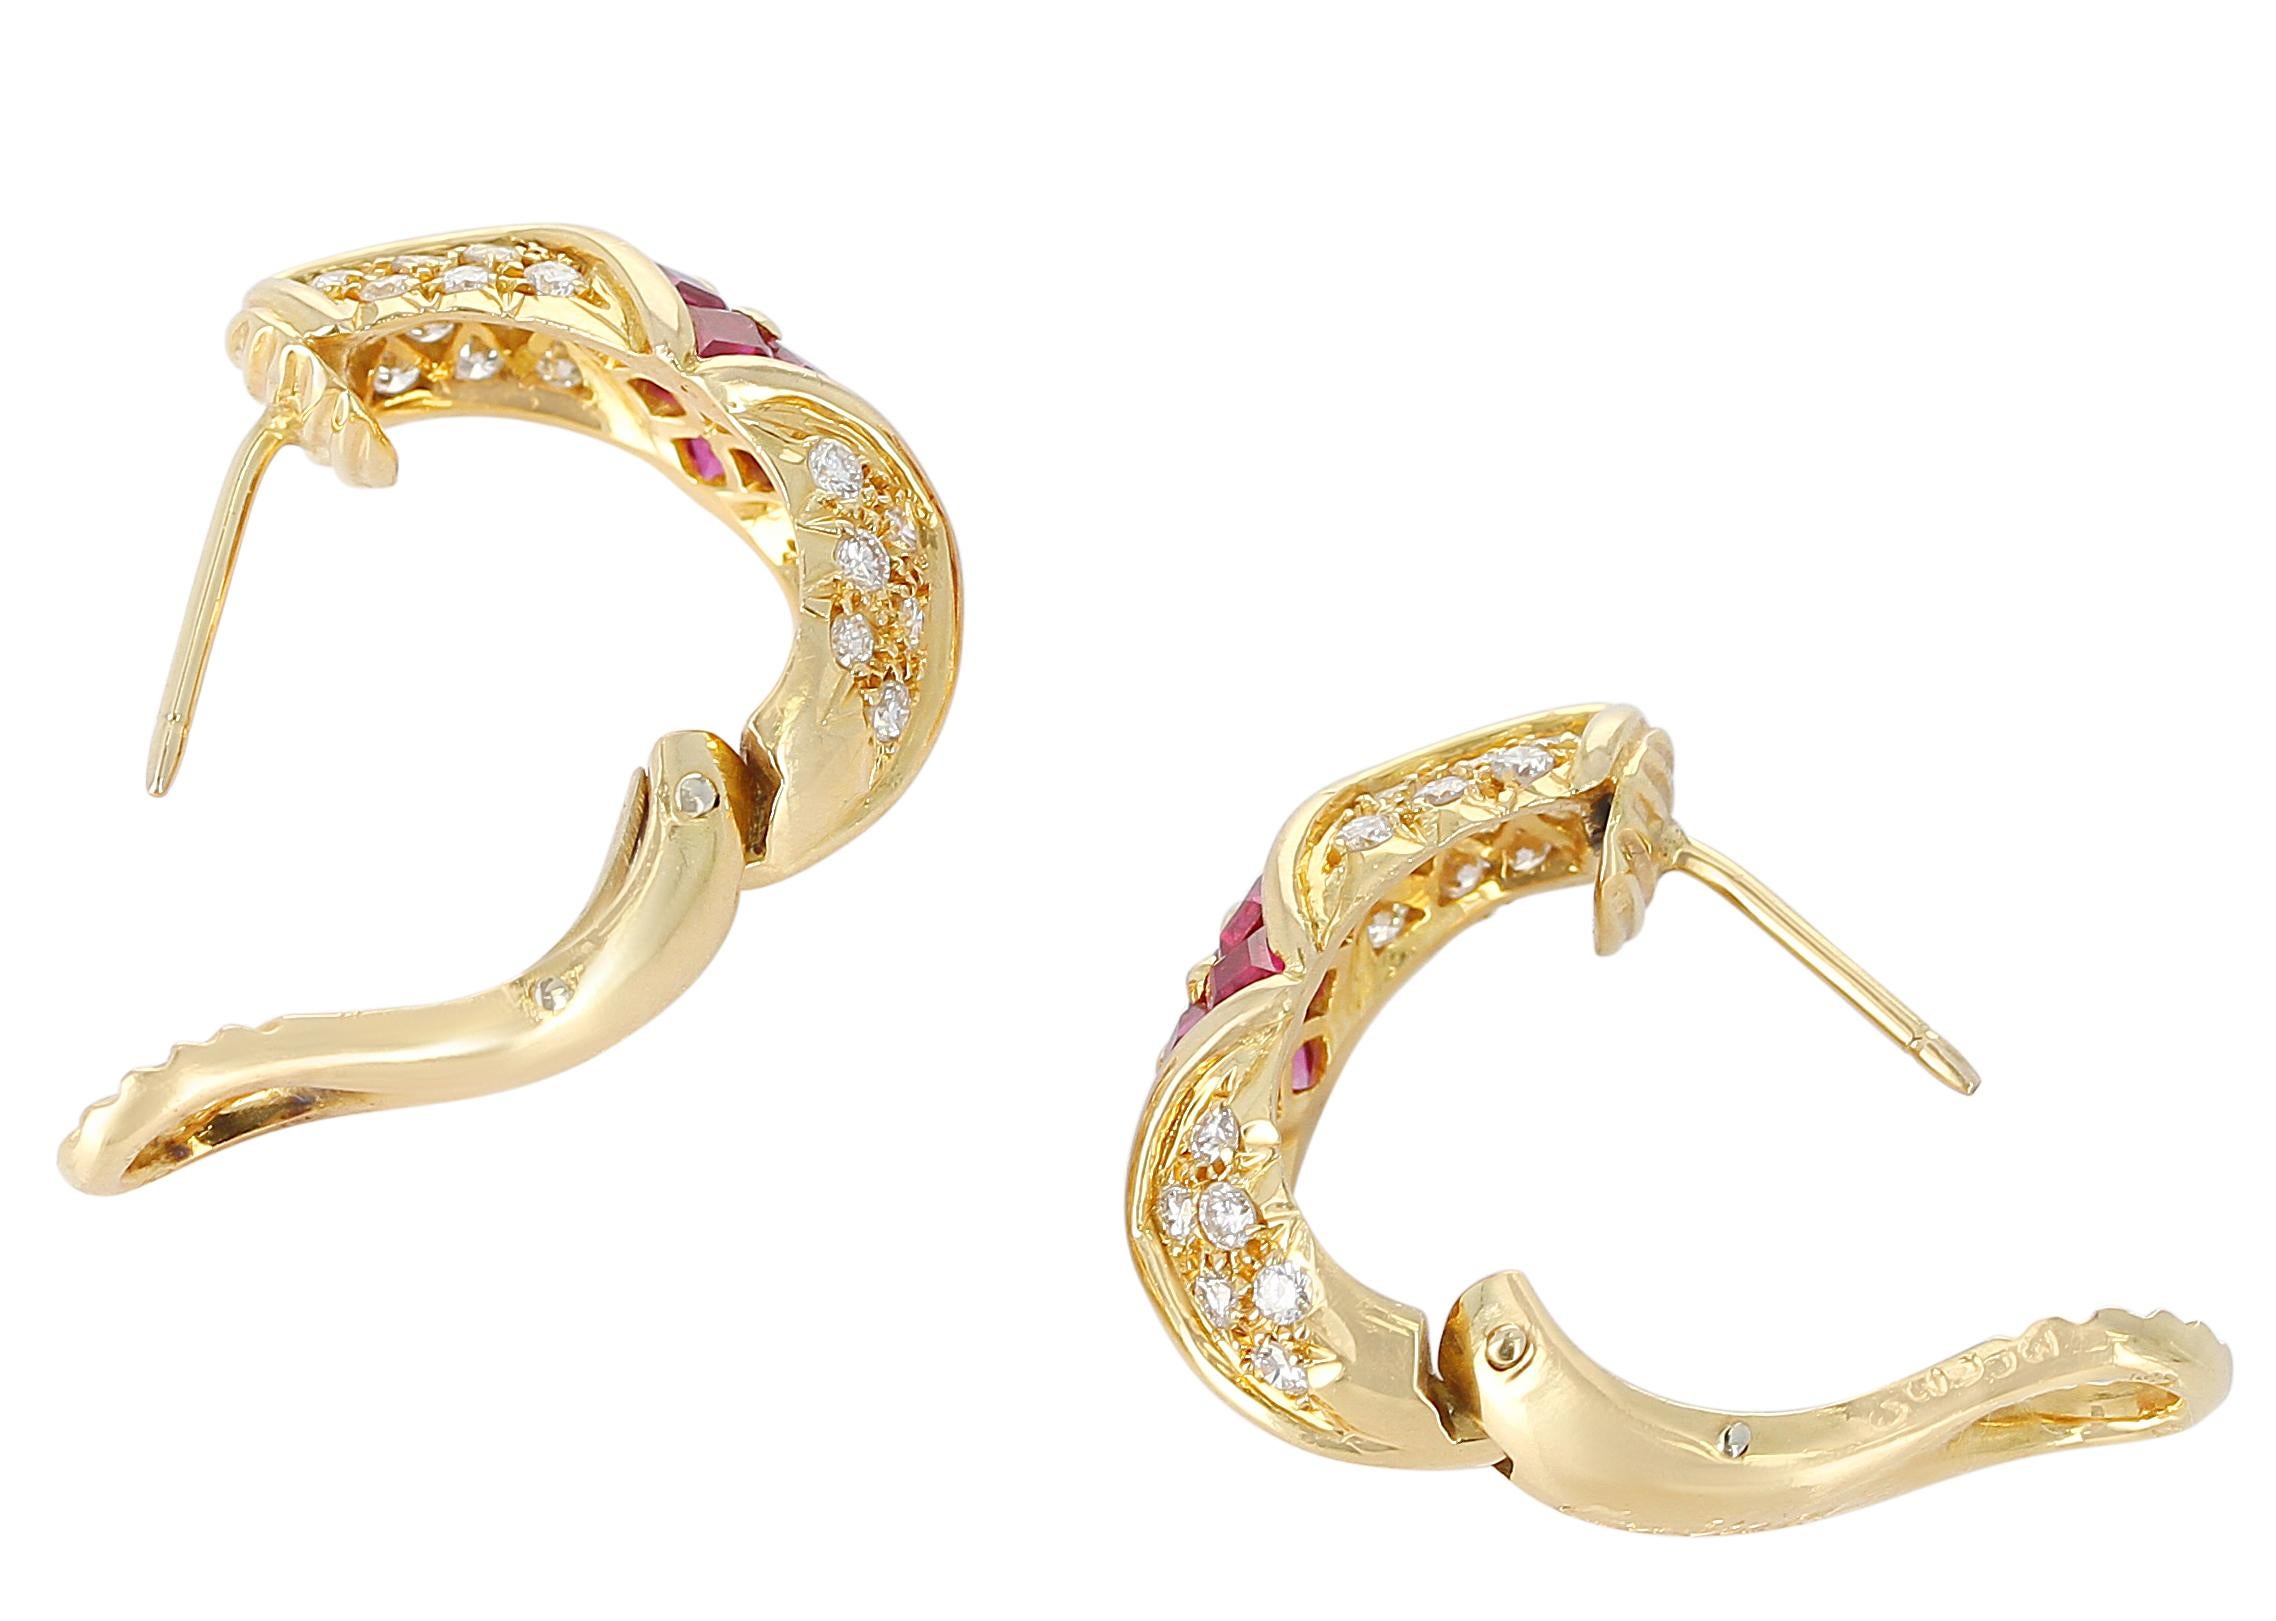 A pair of exquisite Cartier Ruby and Diamond Earrings, with 1.75 carats of square-cut Rubies and 1.10 carats of round Diamonds. 18 Karat Yellow Gold. Length: 2 CM.